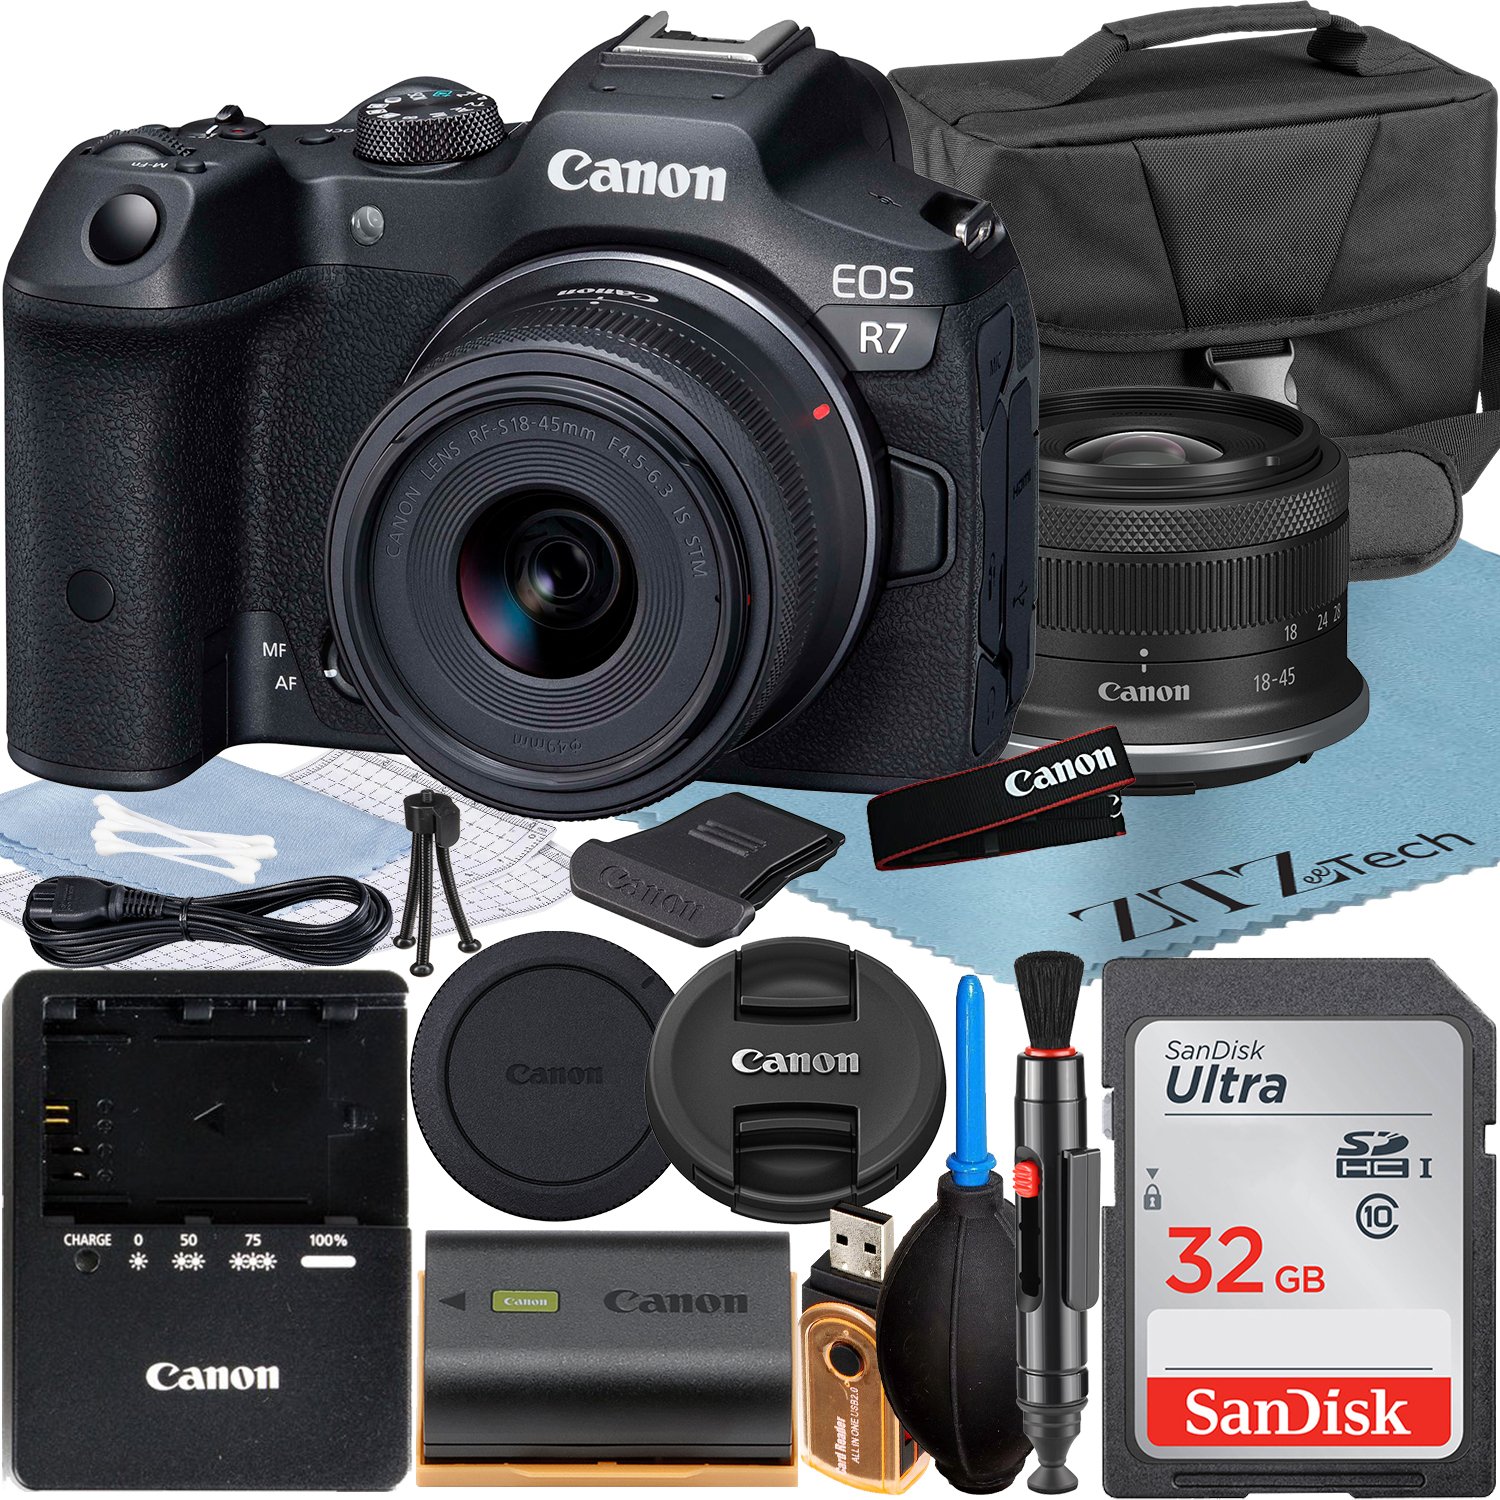 Canon EOS R7 Mirrorless Camera with RF-S 18-45mm Lens + SanDisk 32GB Memory Card + Case + ZeeTech Accessory Bundle